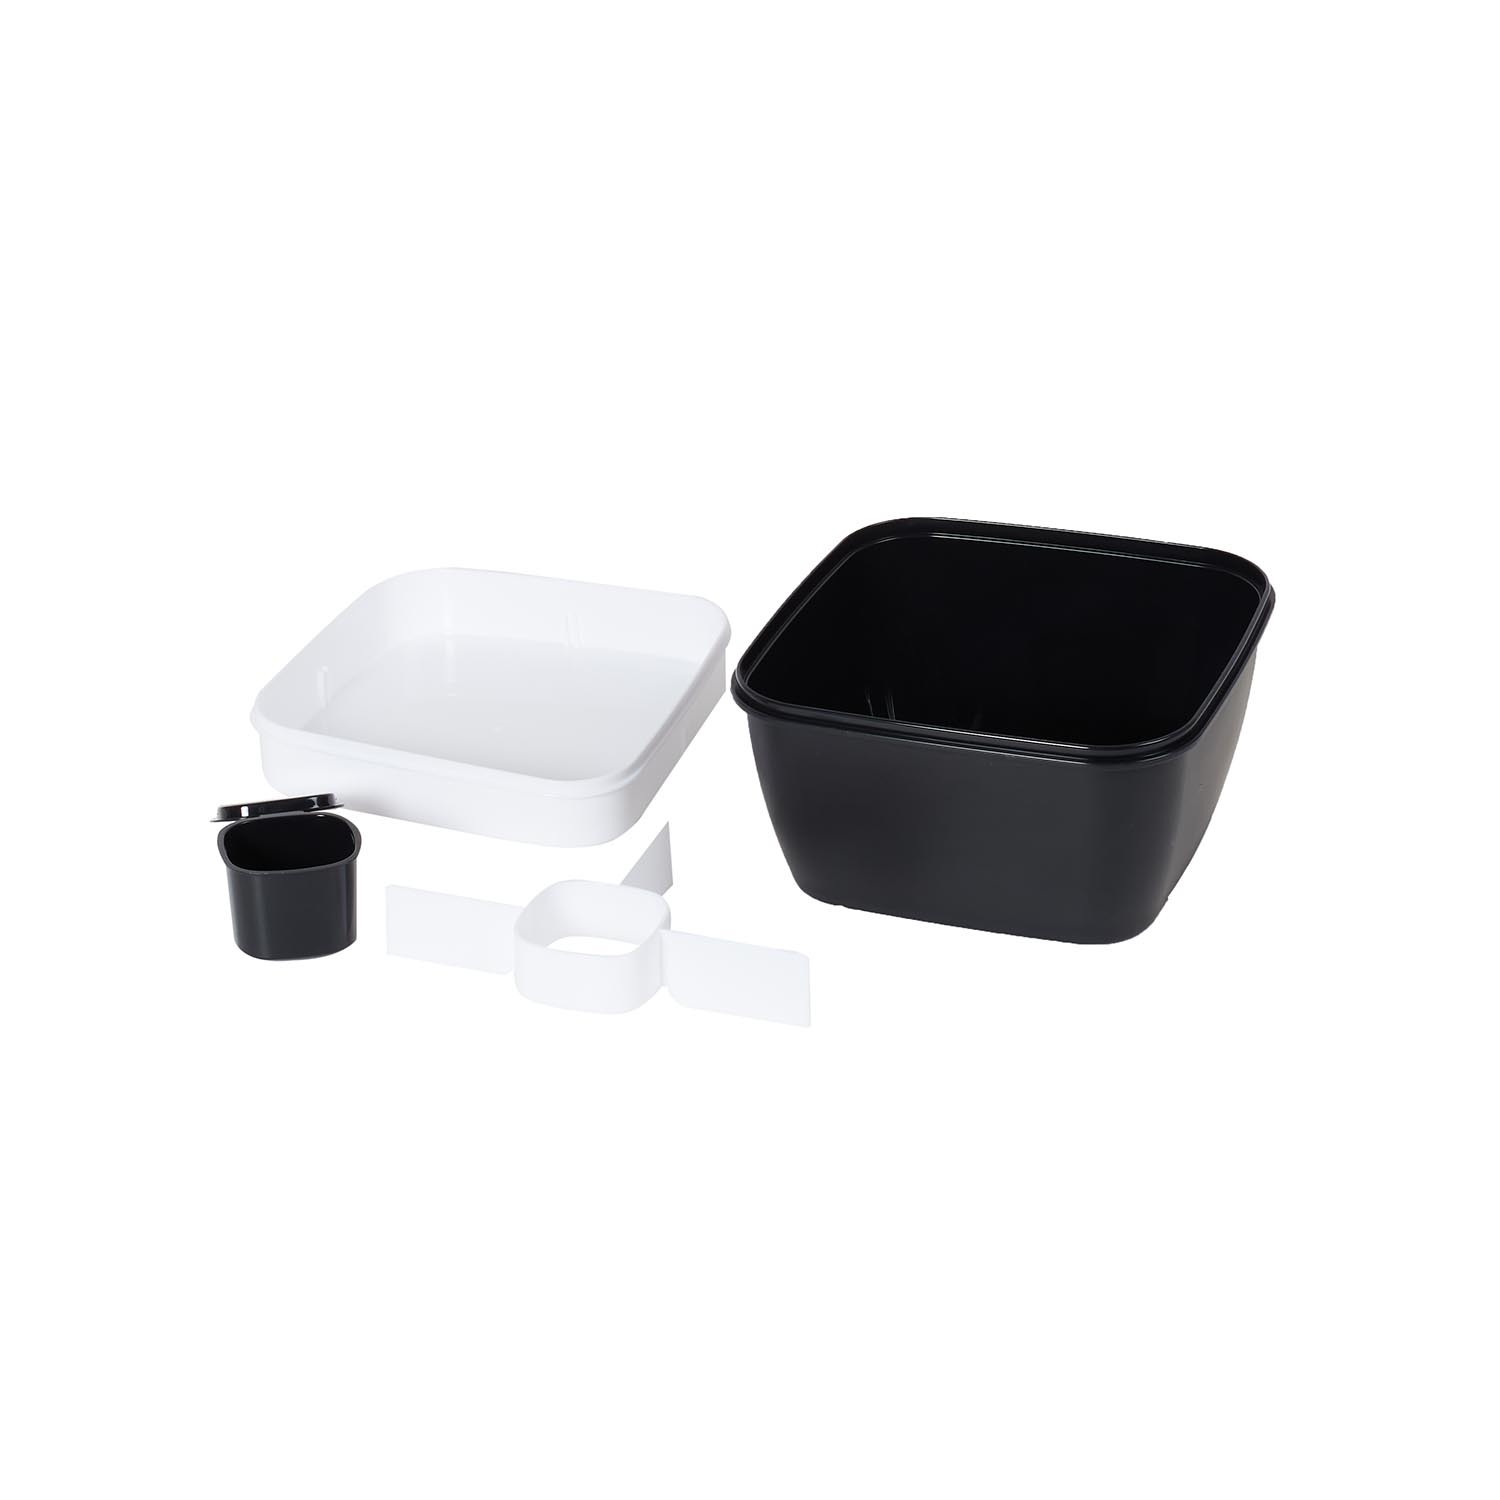 Square Compartment Lunch Box - Black / Large Image 4